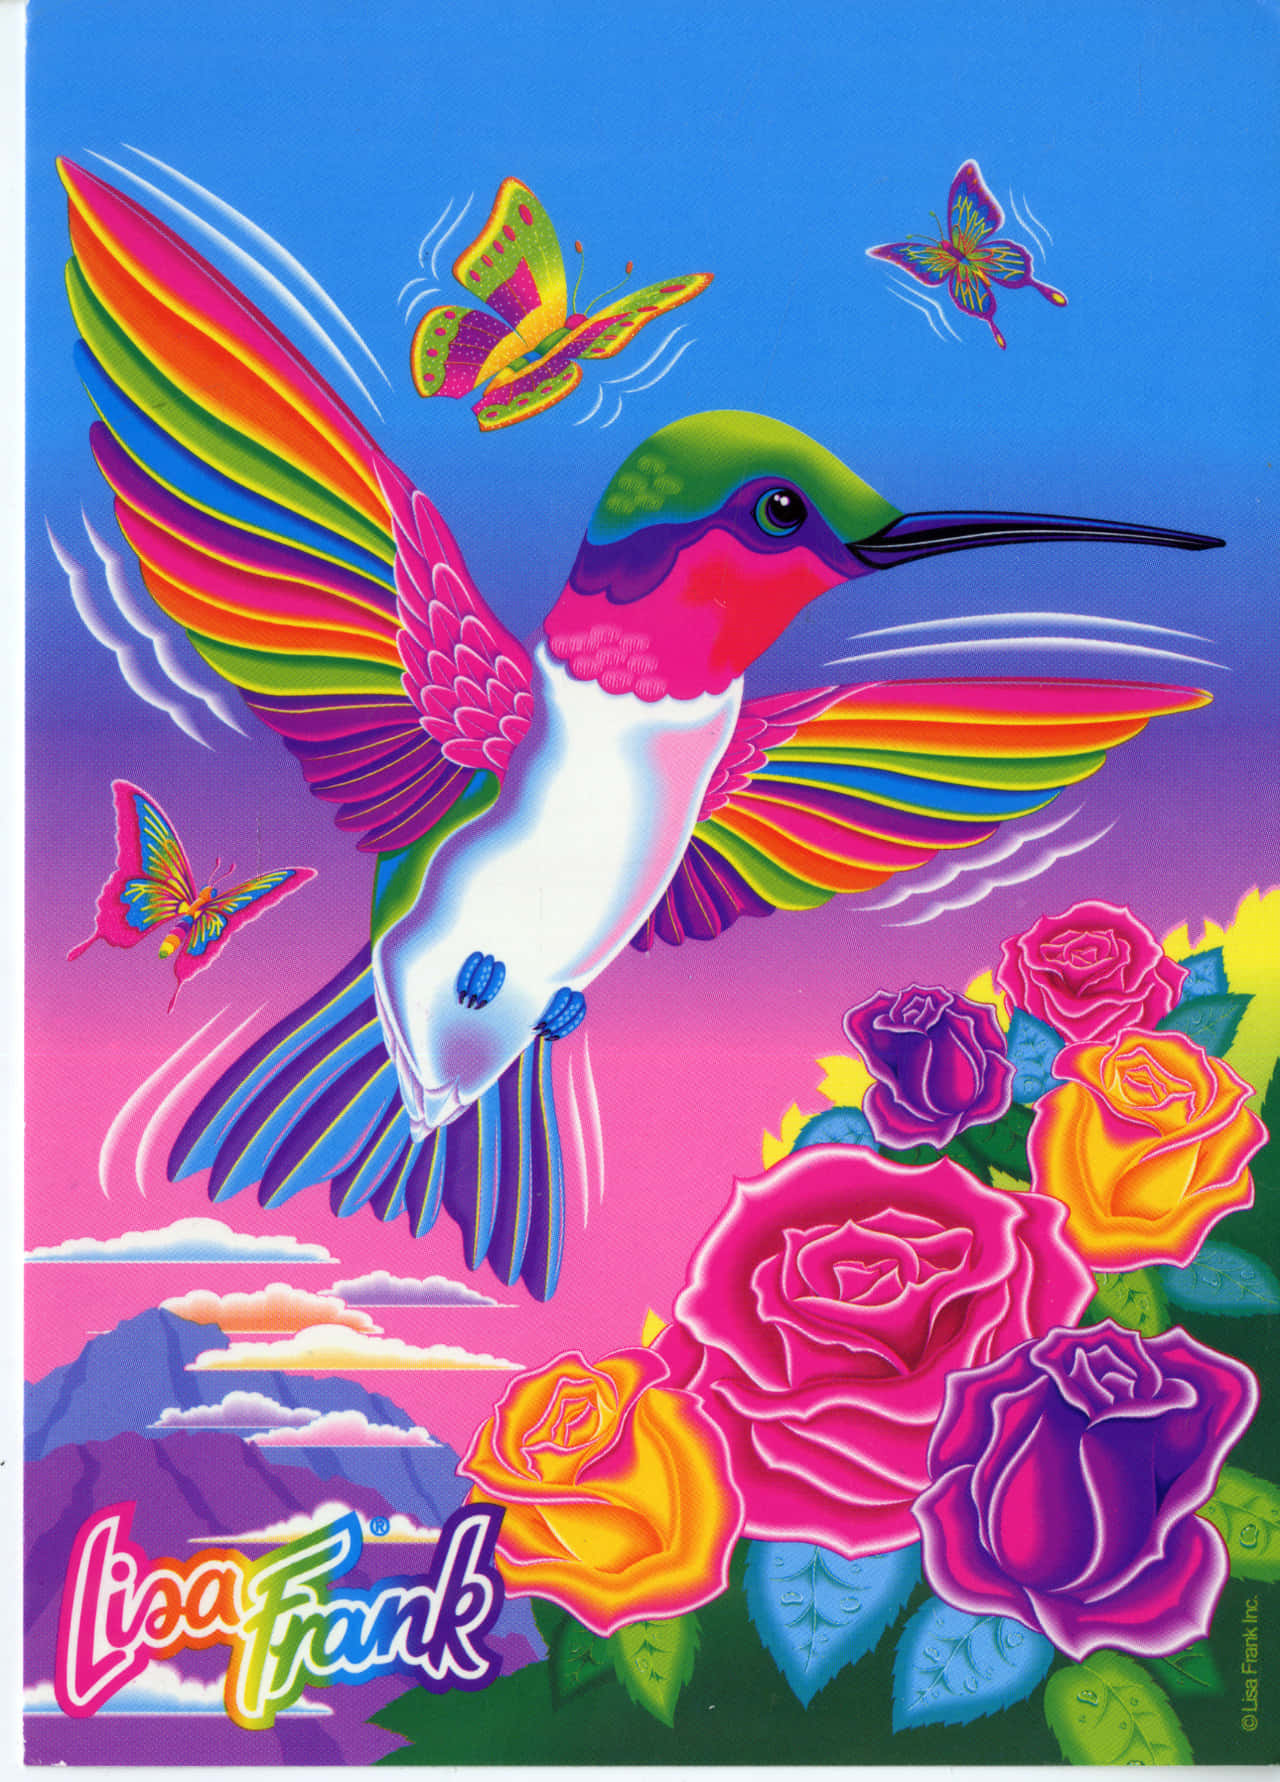 "Surrounded by Rainbows: A Lisa Frank Unicorn" Wallpaper